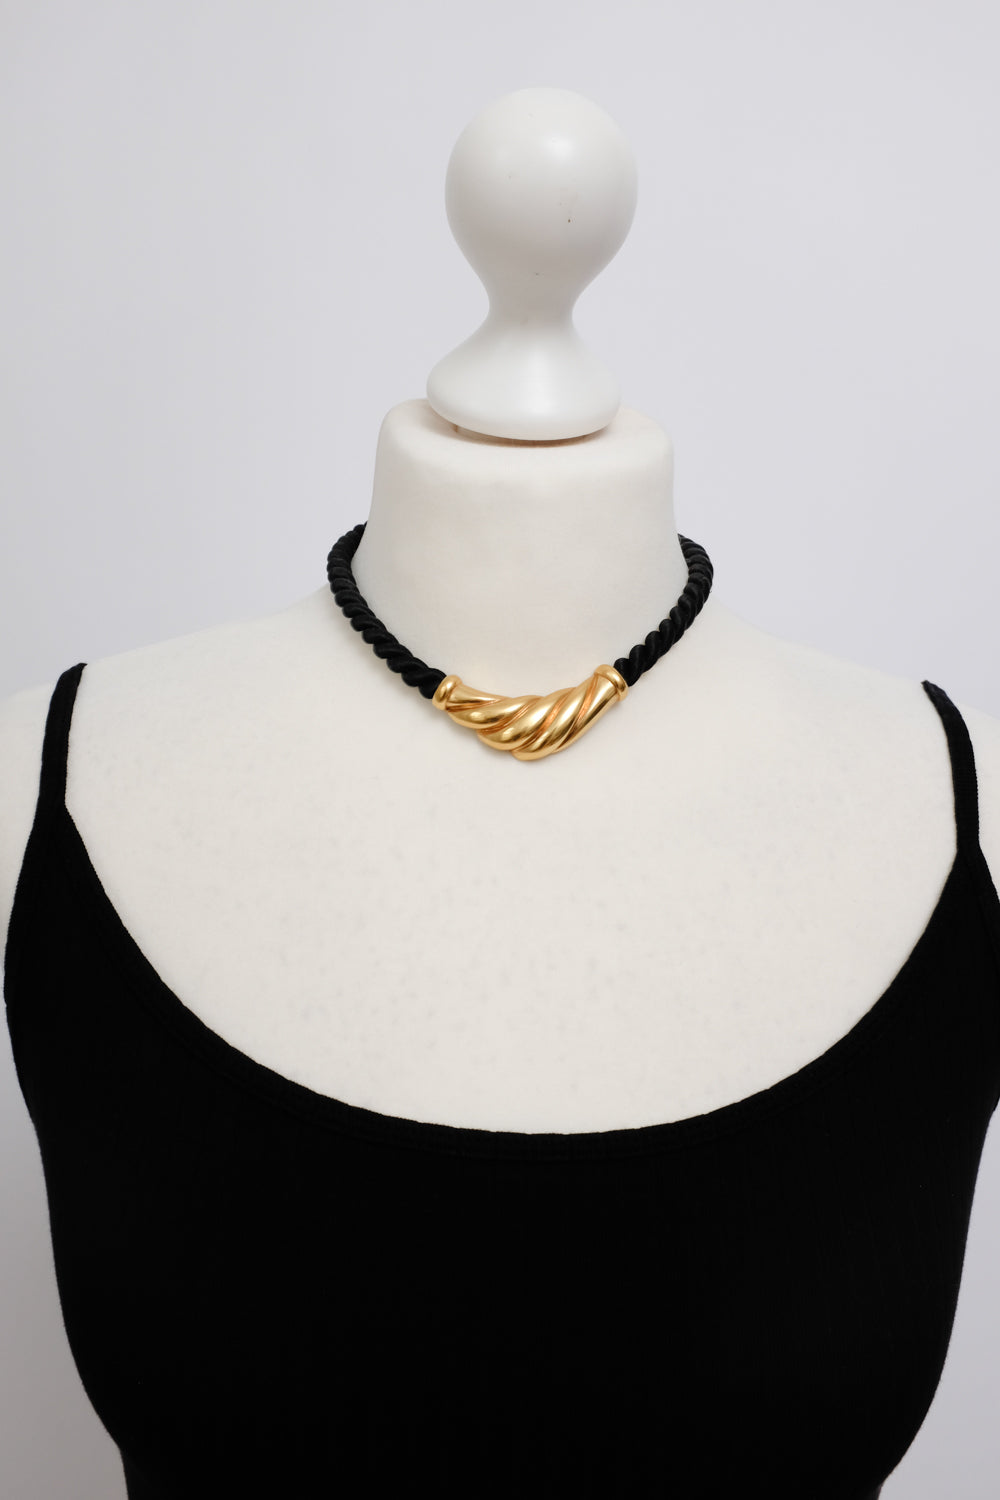 VINTAGE NOIRE BRAIDED CORD CHOKER NECKLACE